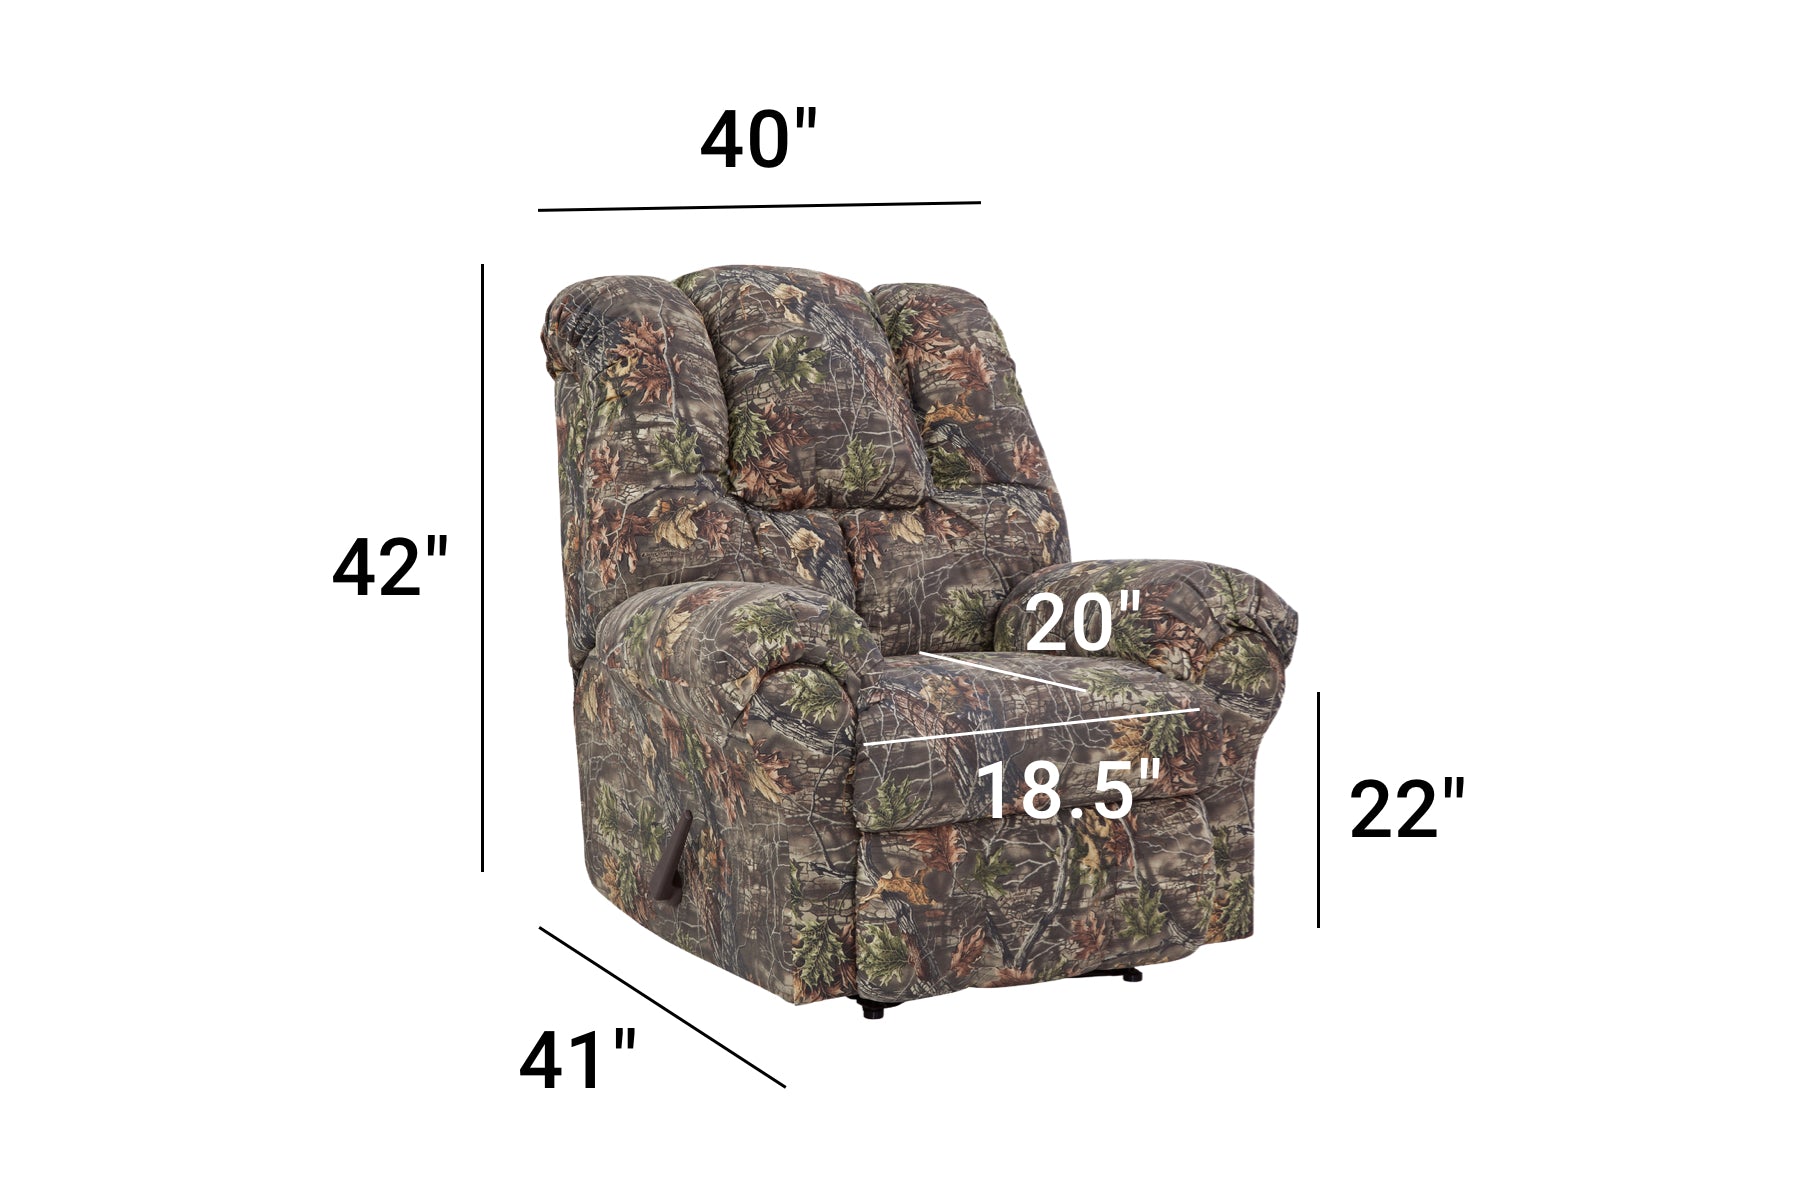 A86V1 Recliner - Camouflage